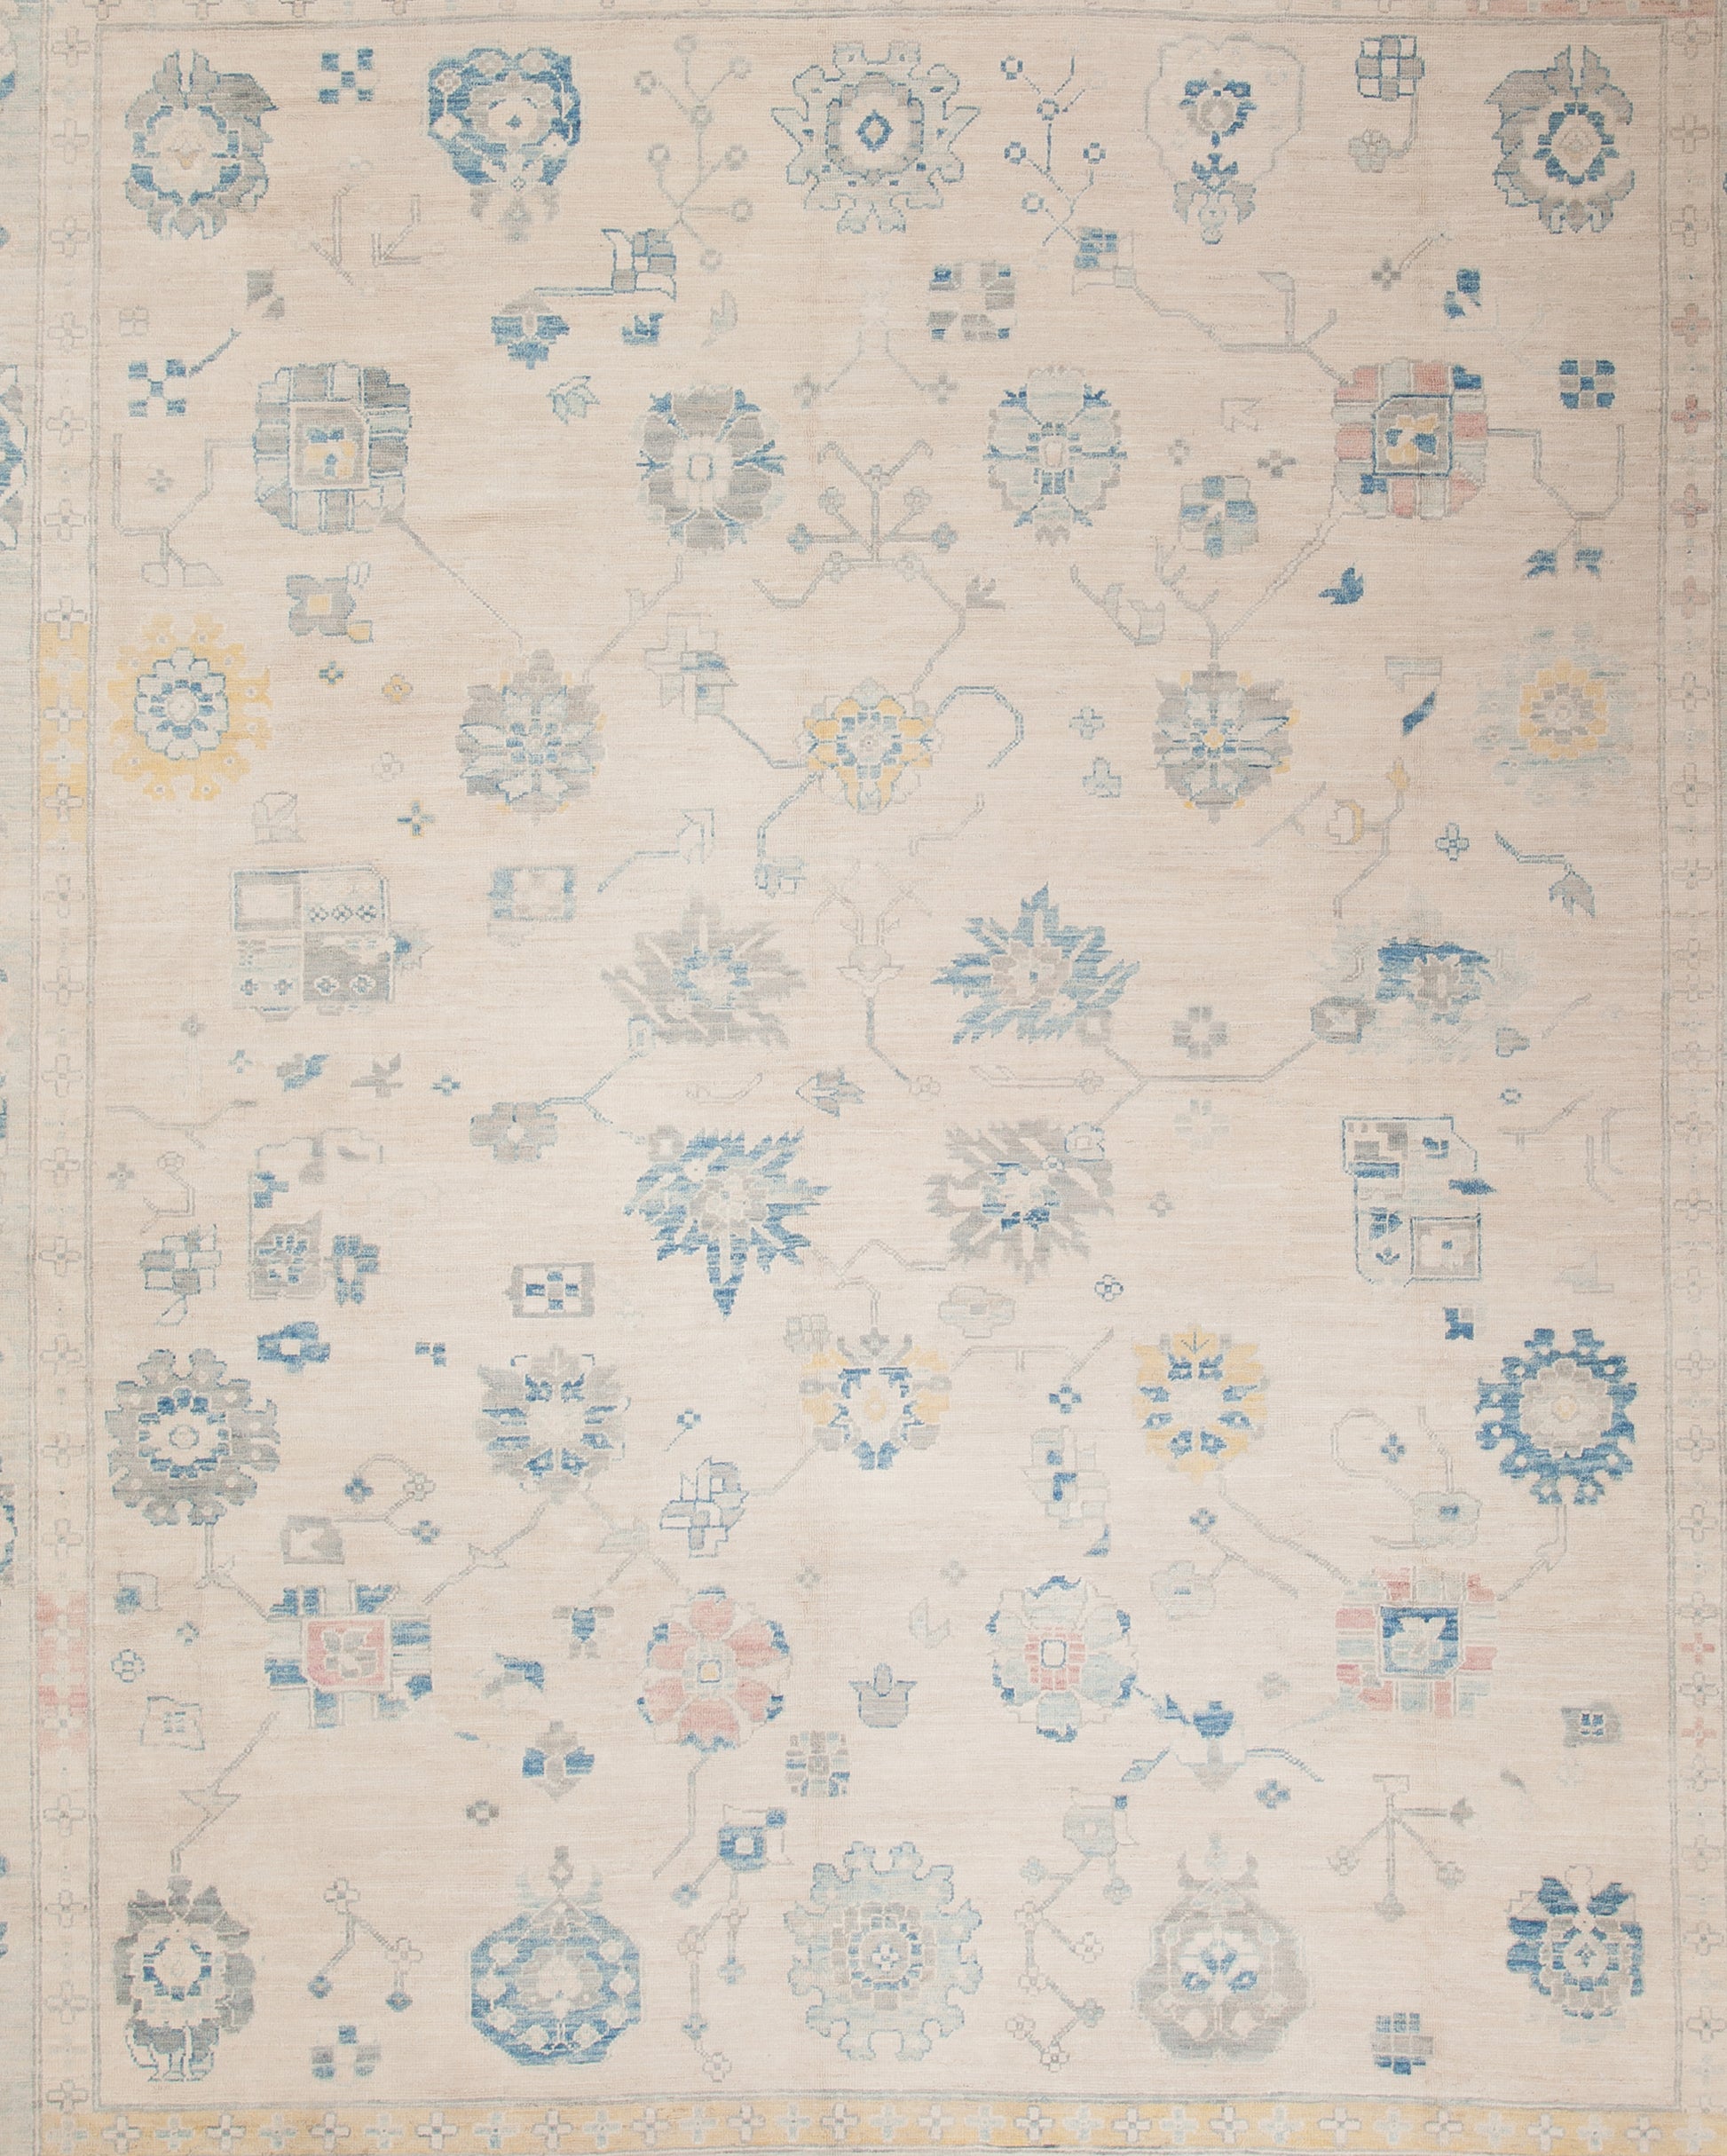 The center of this rug displays the flowers in blue and few of them in yellow.